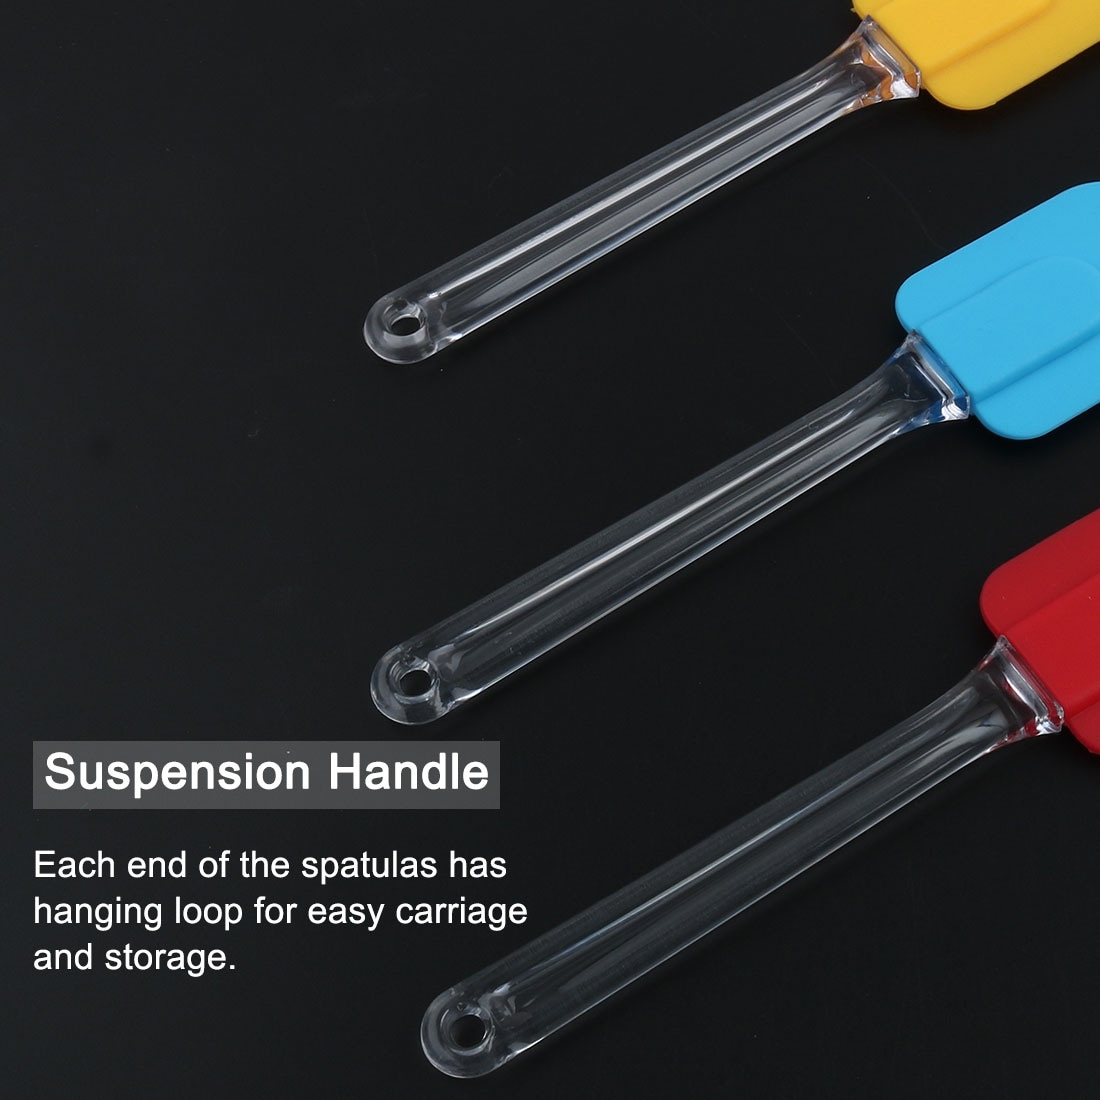 https://ak1.ostkcdn.com/images/products/is/images/direct/9aaf1a737c3ab86314060b6b21d4456d2e279df8/3pcs-Flexible-Silicone-Spatula-Set-Heat-Resistant-Kitchen-Non-Stick-Spatula-Set-for-Cooking-Baking-Blue-Yellow-Red.jpg